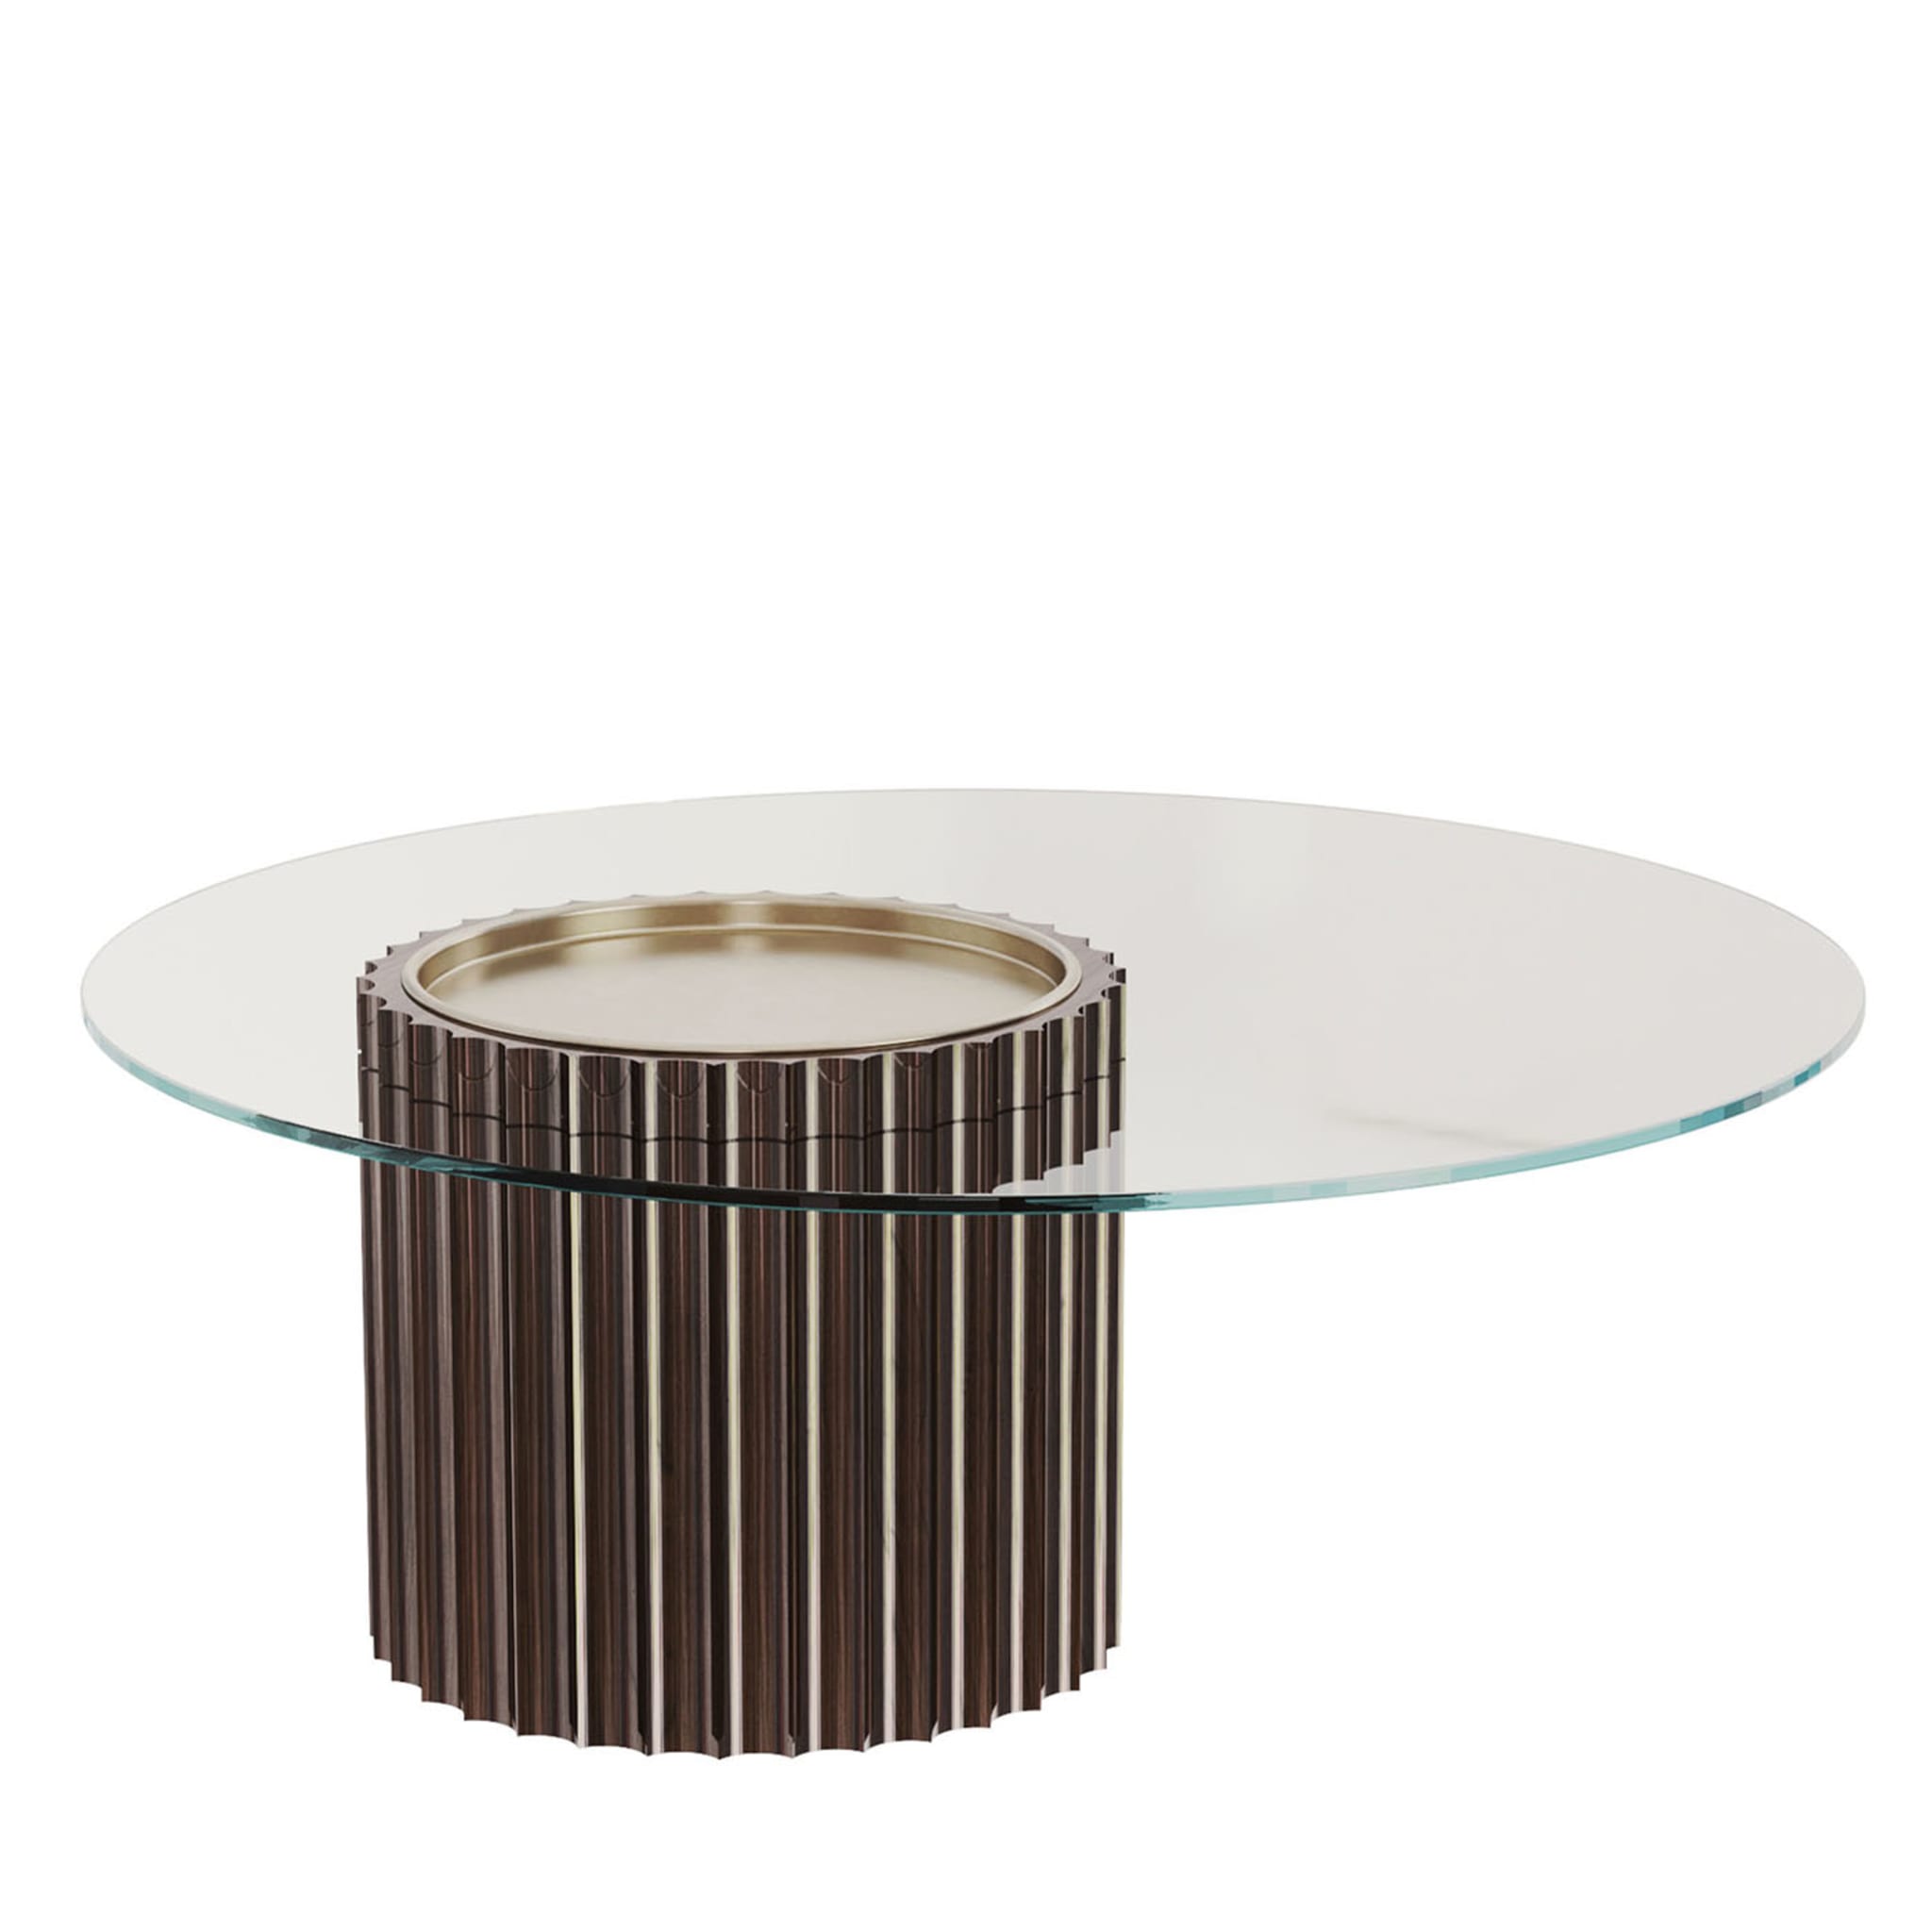 Modern Art Deco Coffee Table In Lacquered Dark Wood With Glass  - Main view